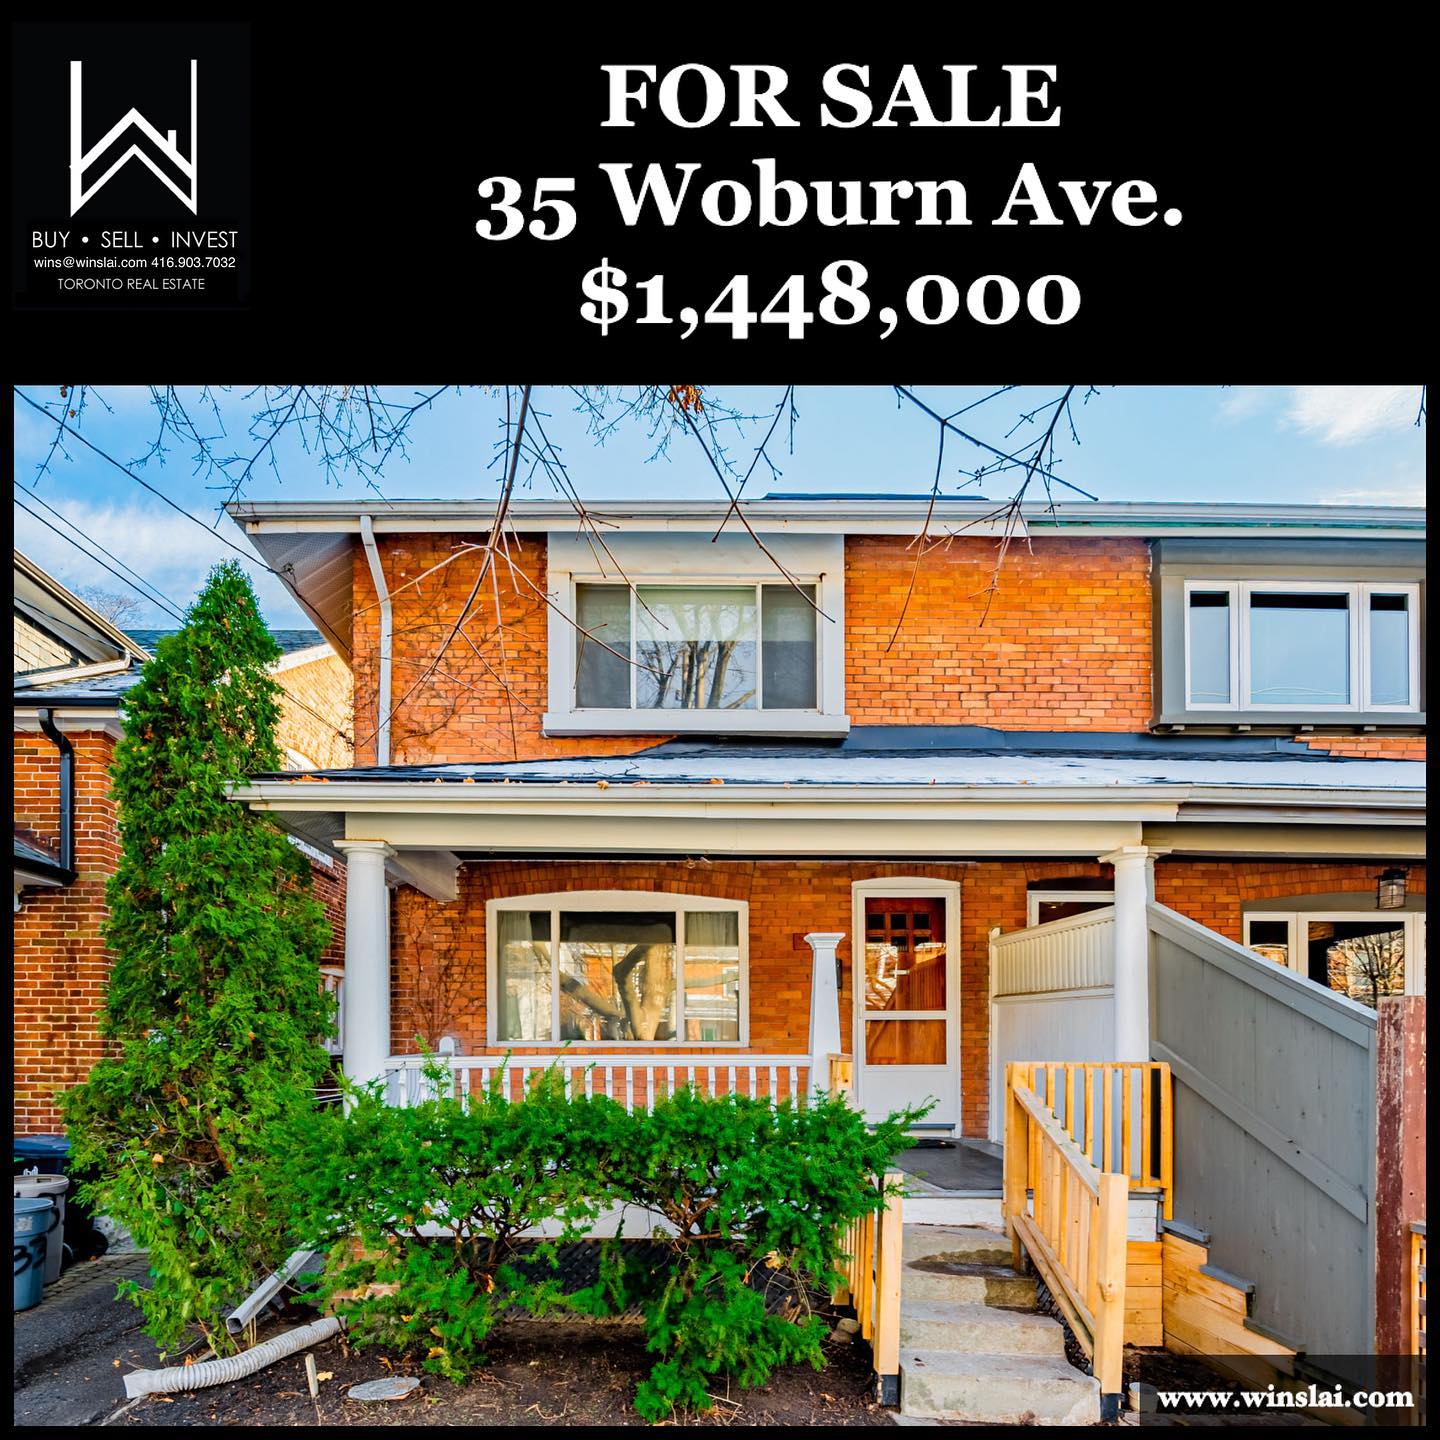 For sale flyer for 35 Woburn Ave.